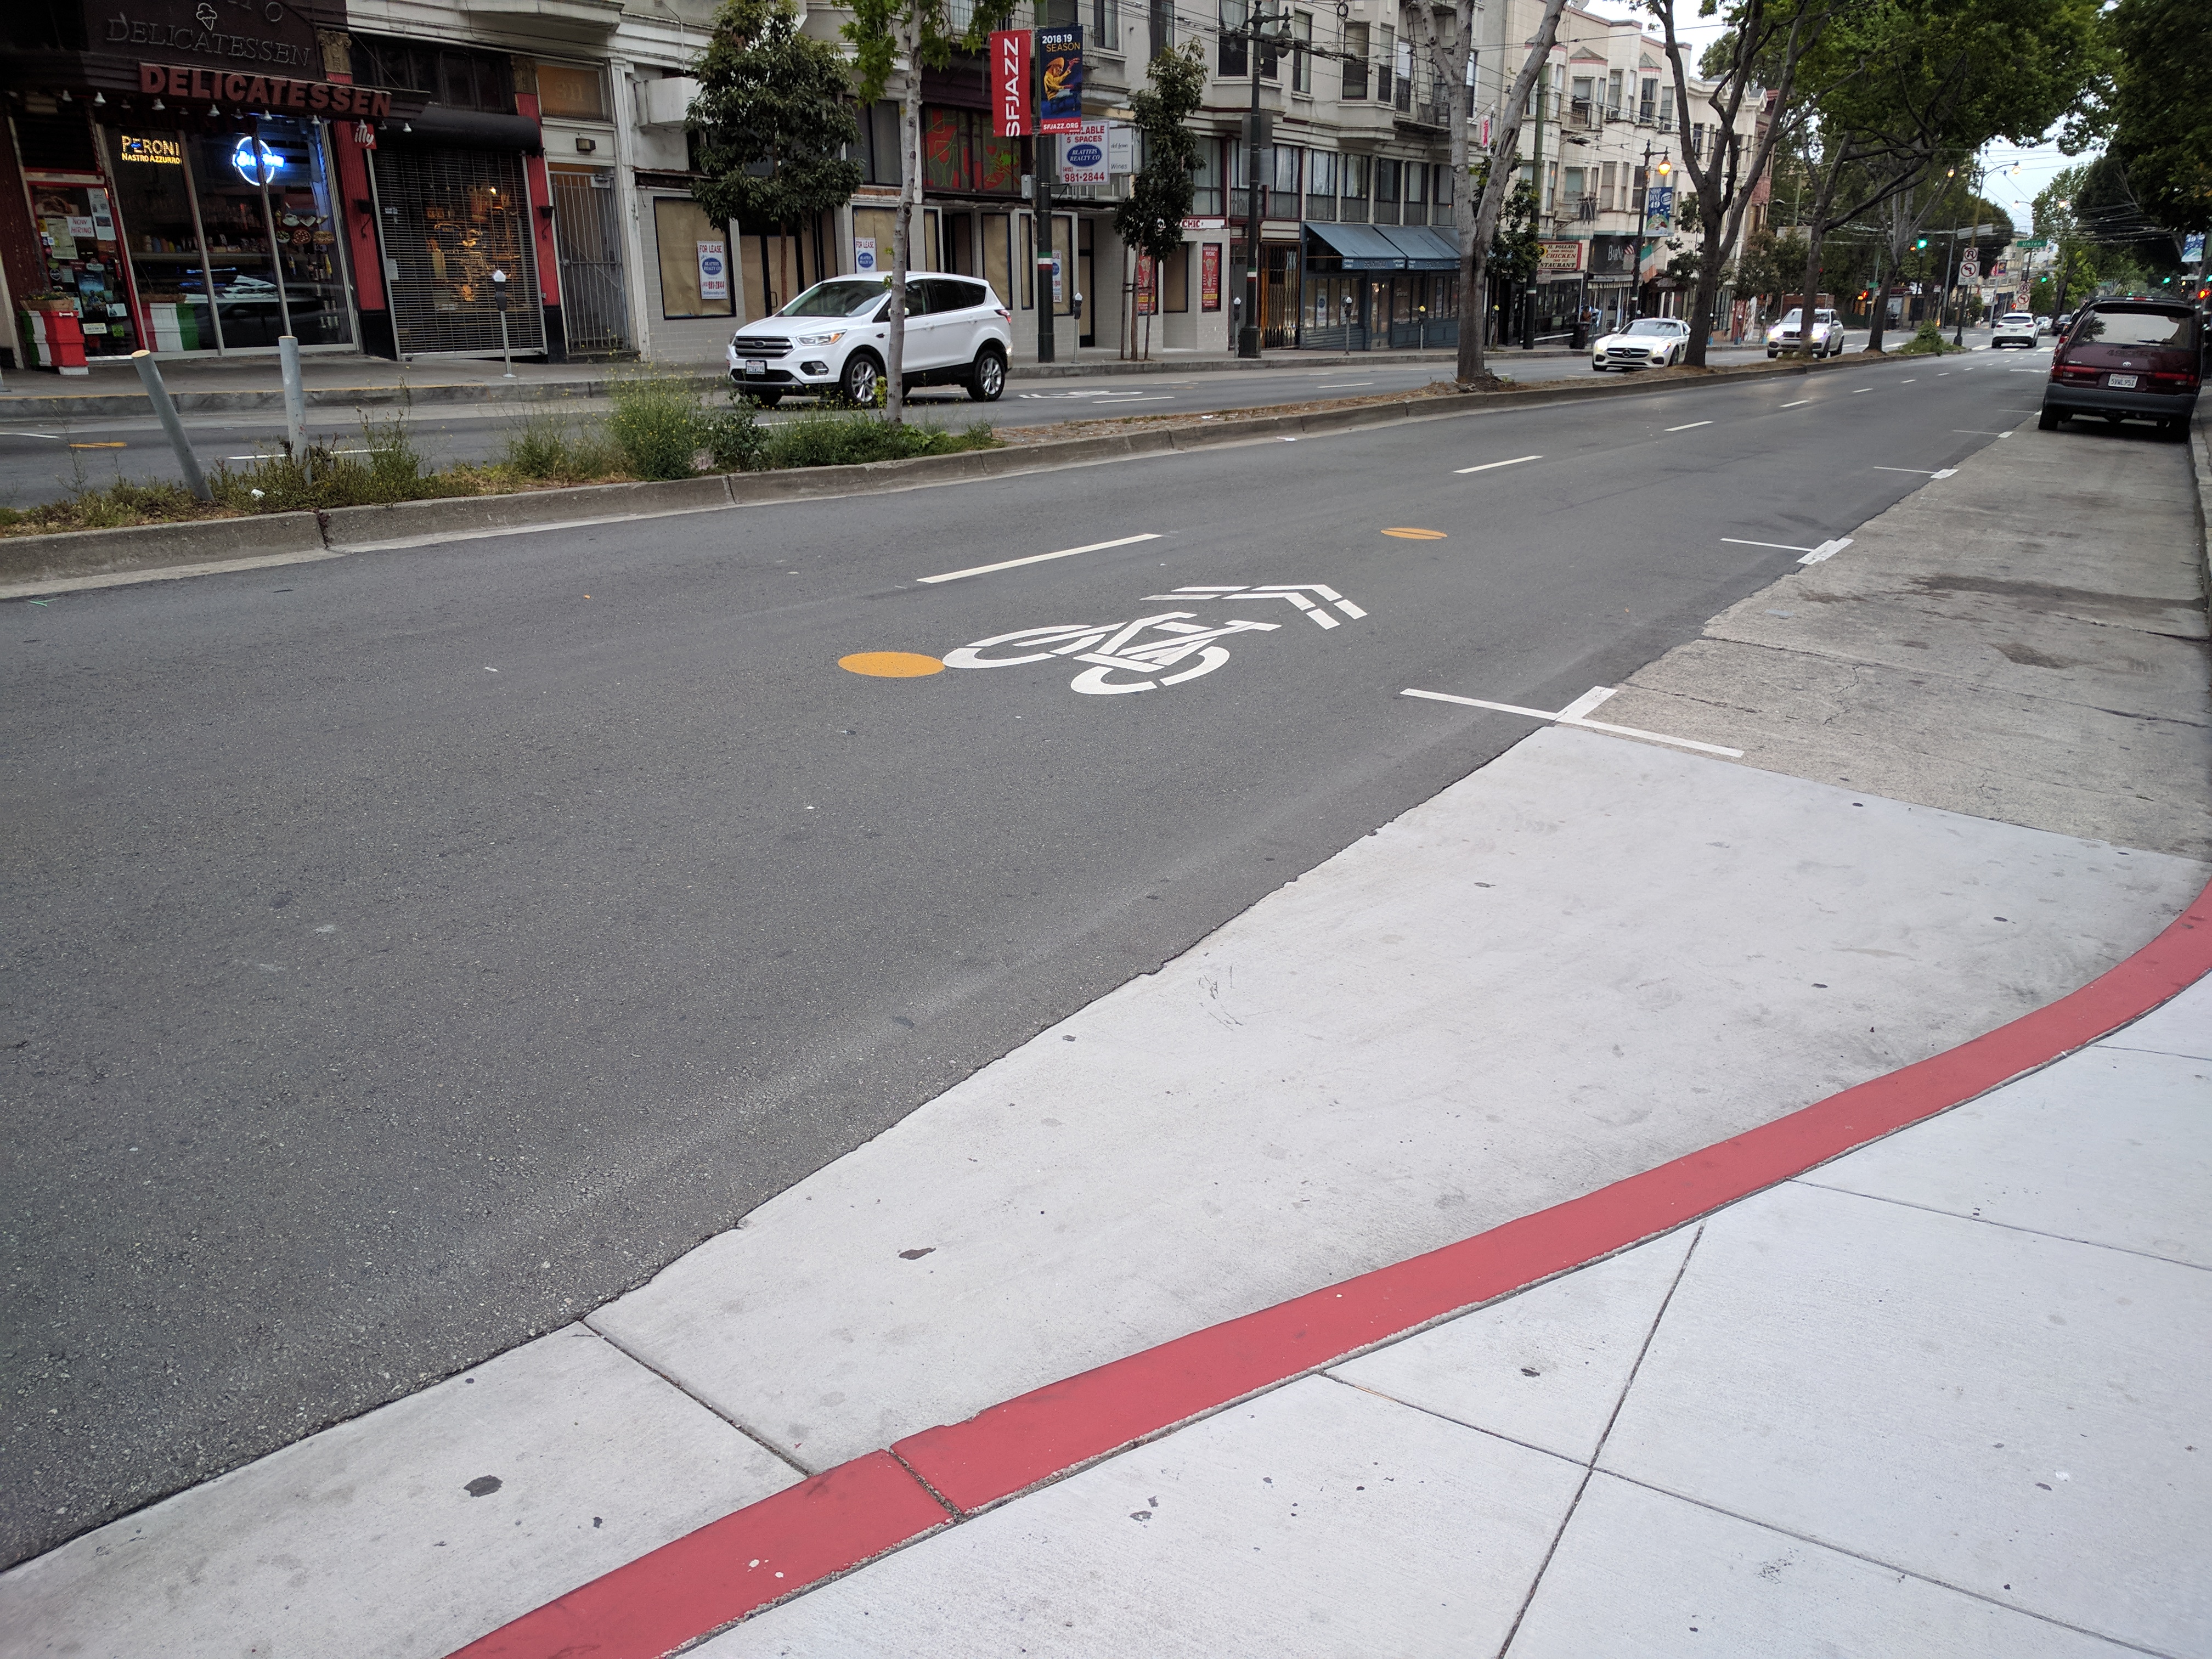 While SoMa is getting protected bike lanes, this is what passes for bike infra in North Beach. Photo: Streetsblog/Rudick